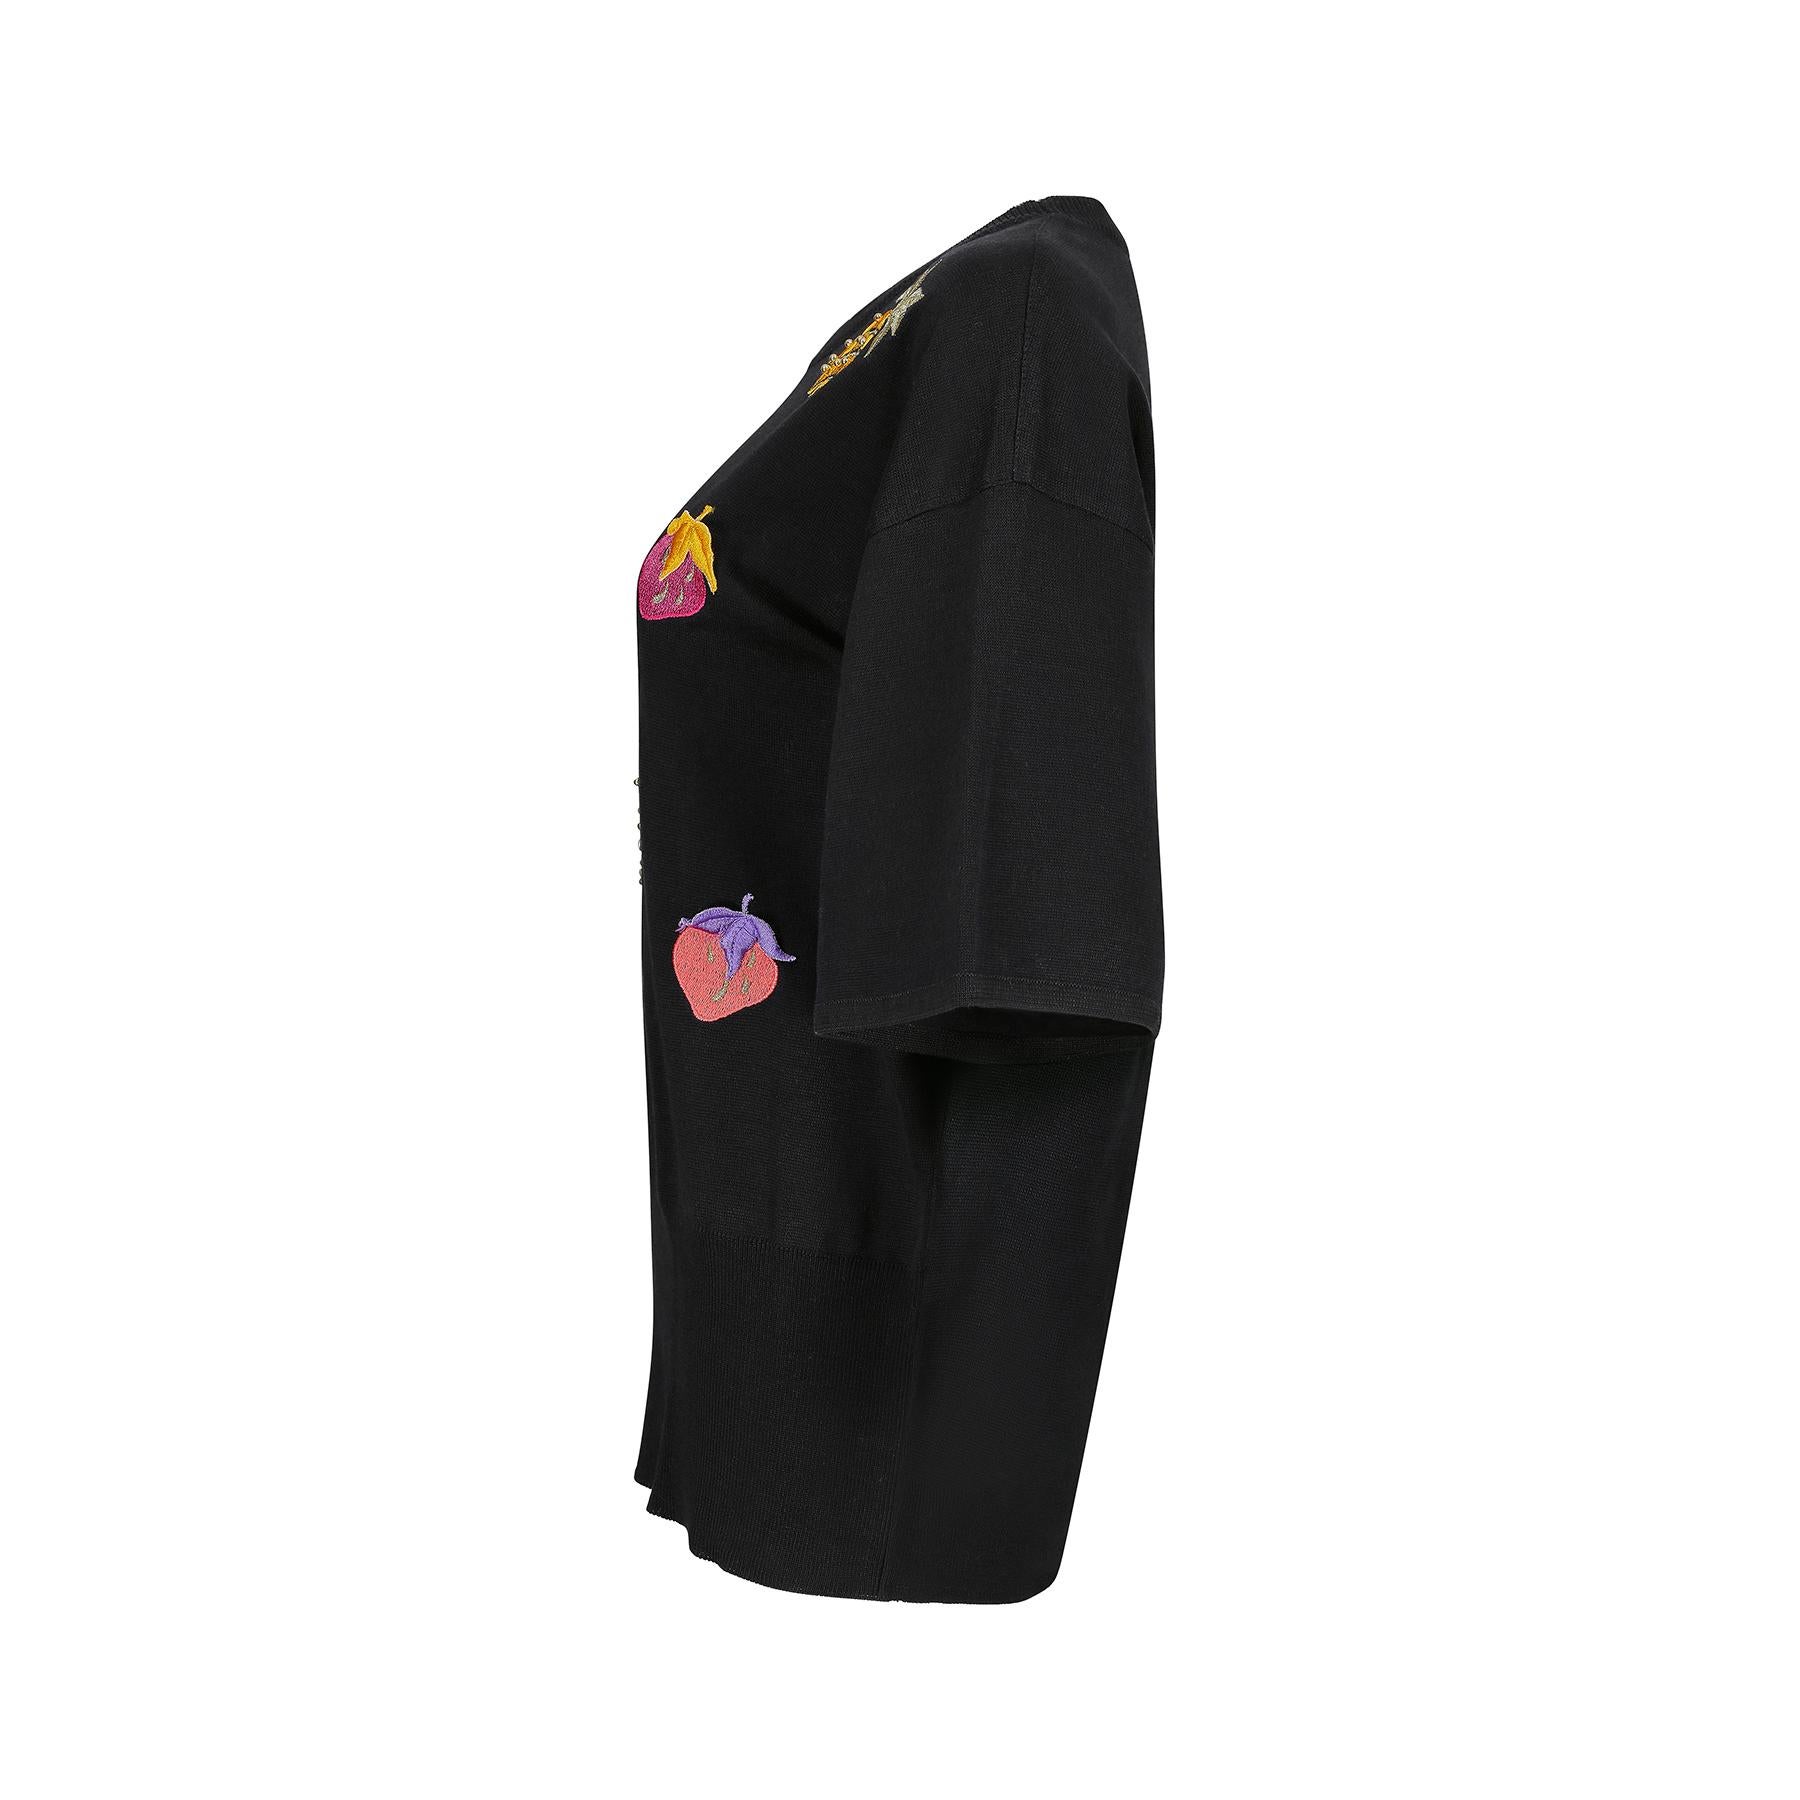 This is a really fun 1990s piece by Escada when they were very high profile and considered a luxury brand. The novelty 'fruit salad' design is of embroidered motifs that represent strawberries and pineapples in a pink, yellow, purple, and russet